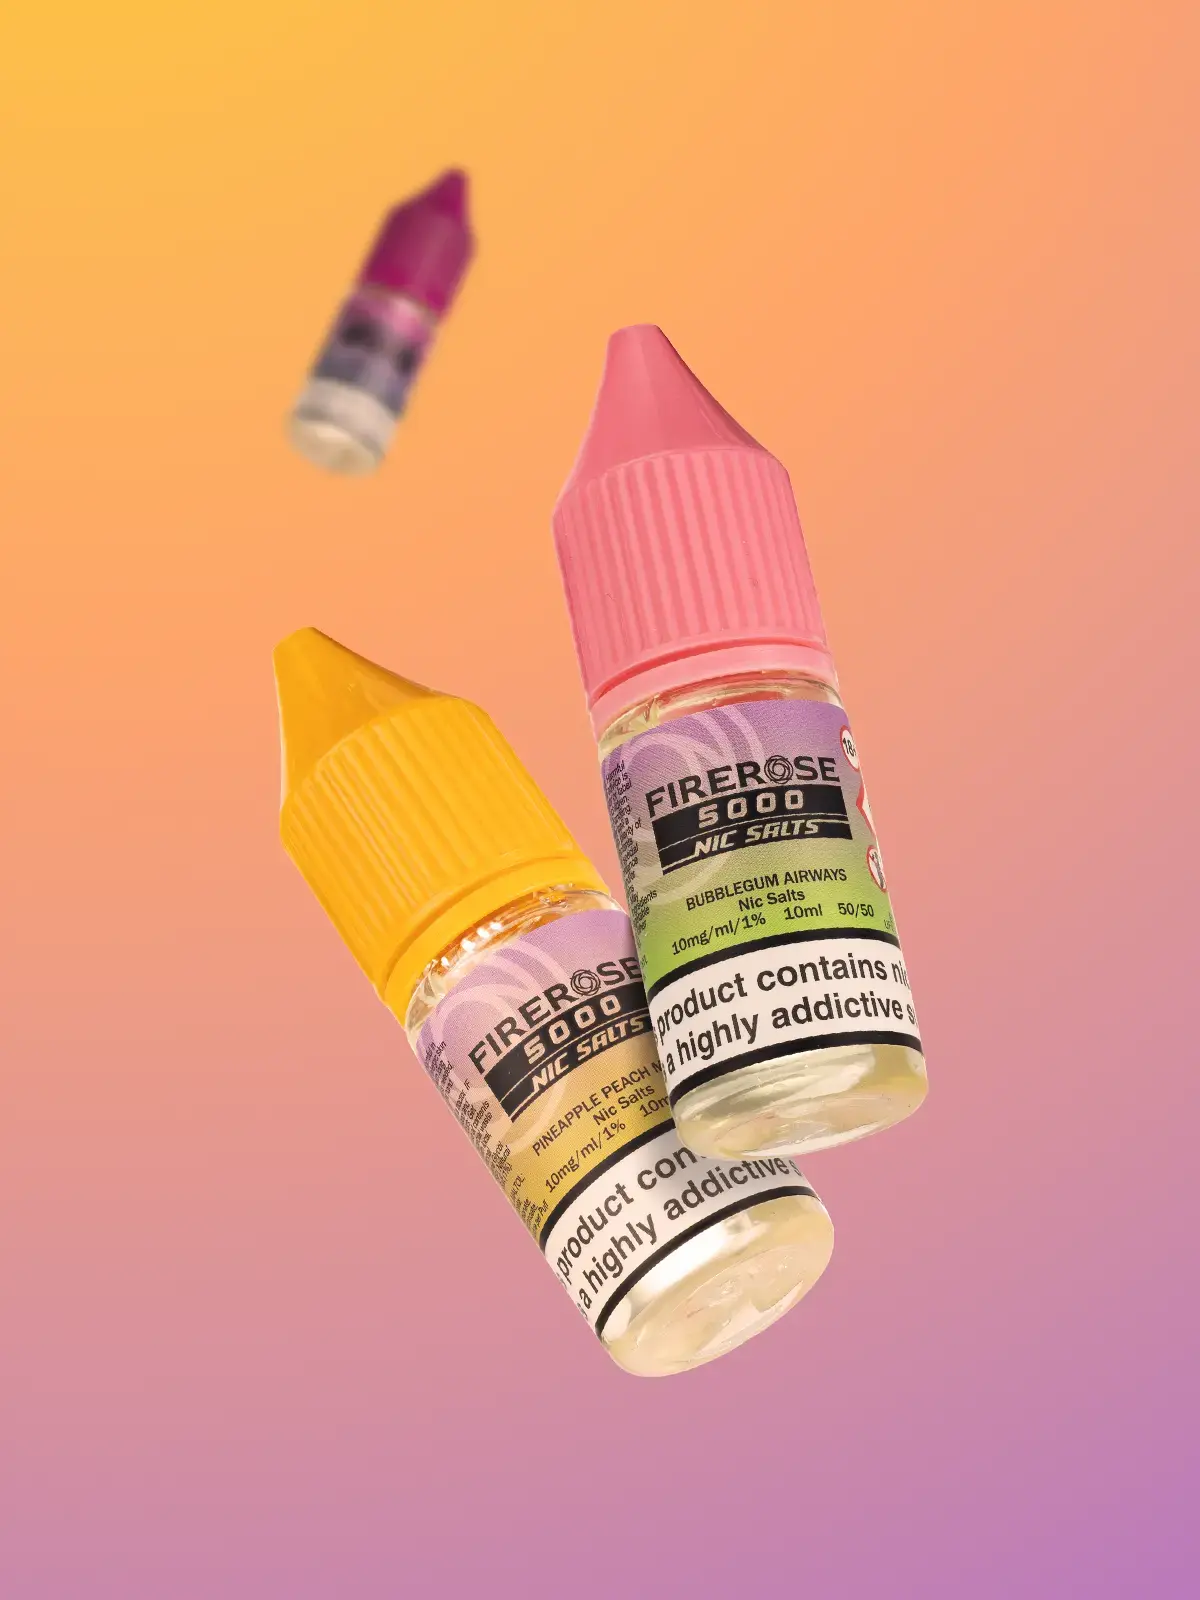 Three bottles of ELUX E-liquid, one out of focus and two in focus; Bubblegum Airways and Pineapple Peach Mango Firerose, floating in front of an orange and purple background